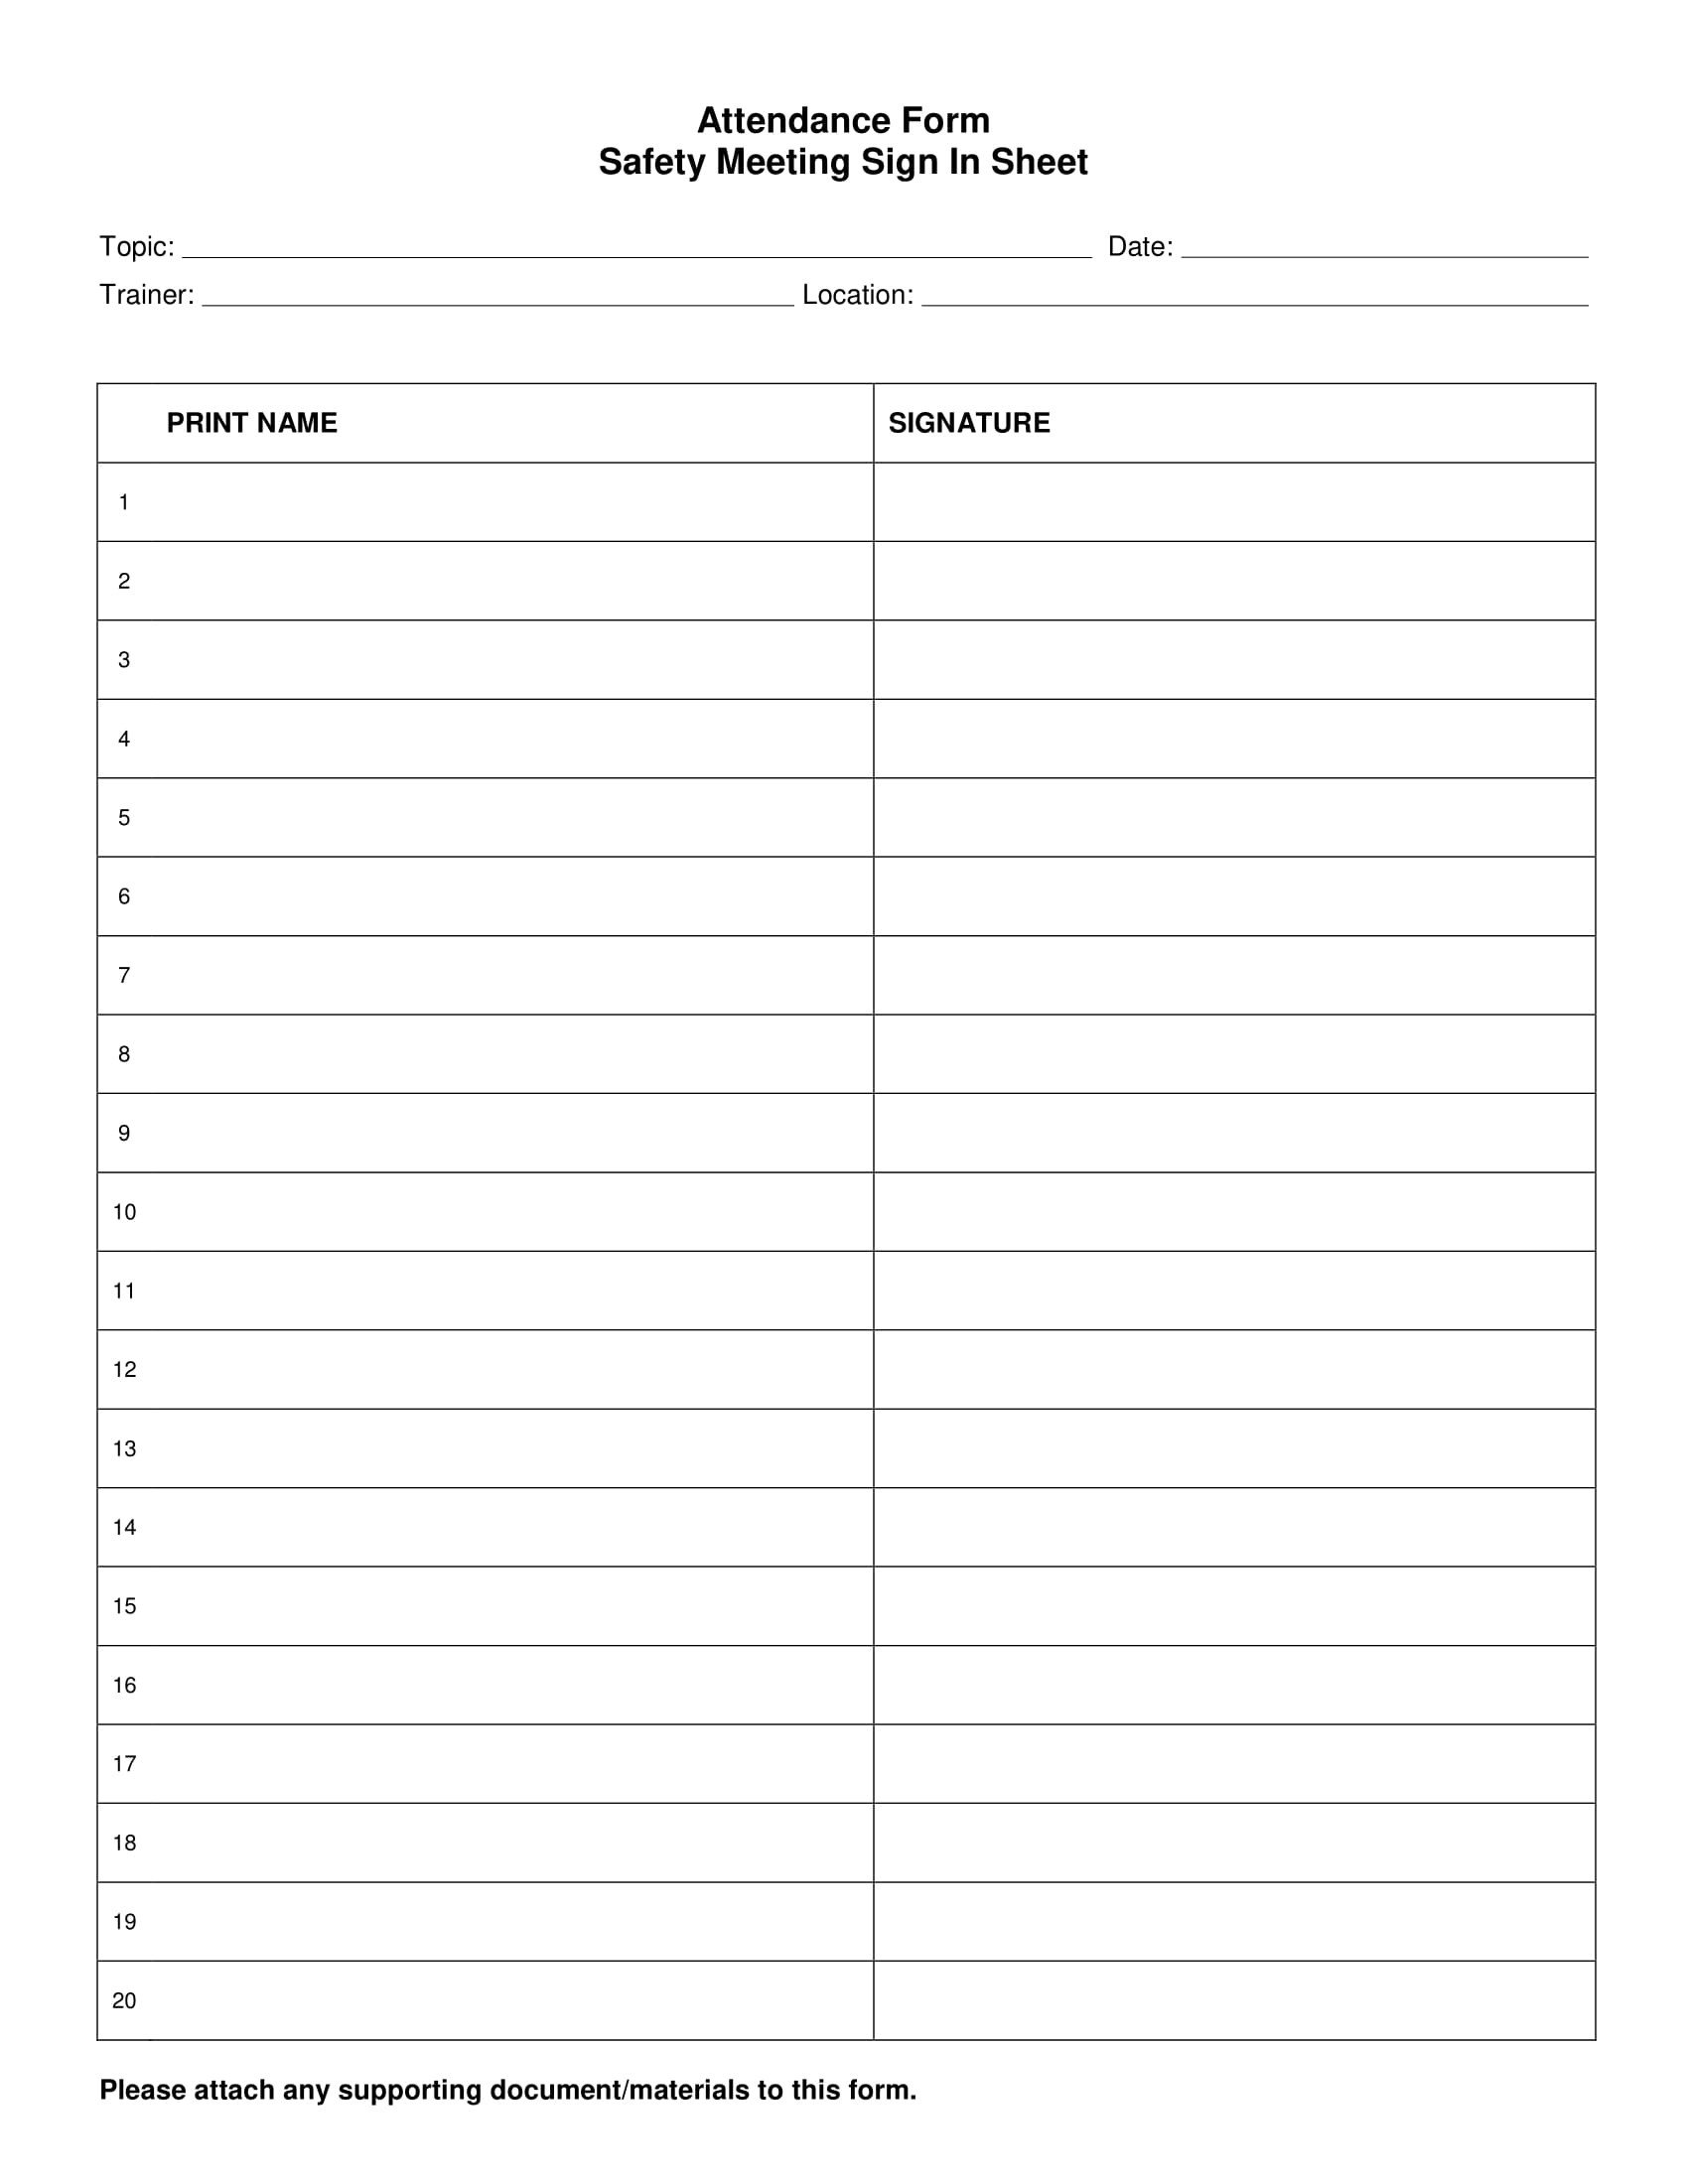 Employees Sign In Sheet 9 Employee attendance form Examples Pdf Word